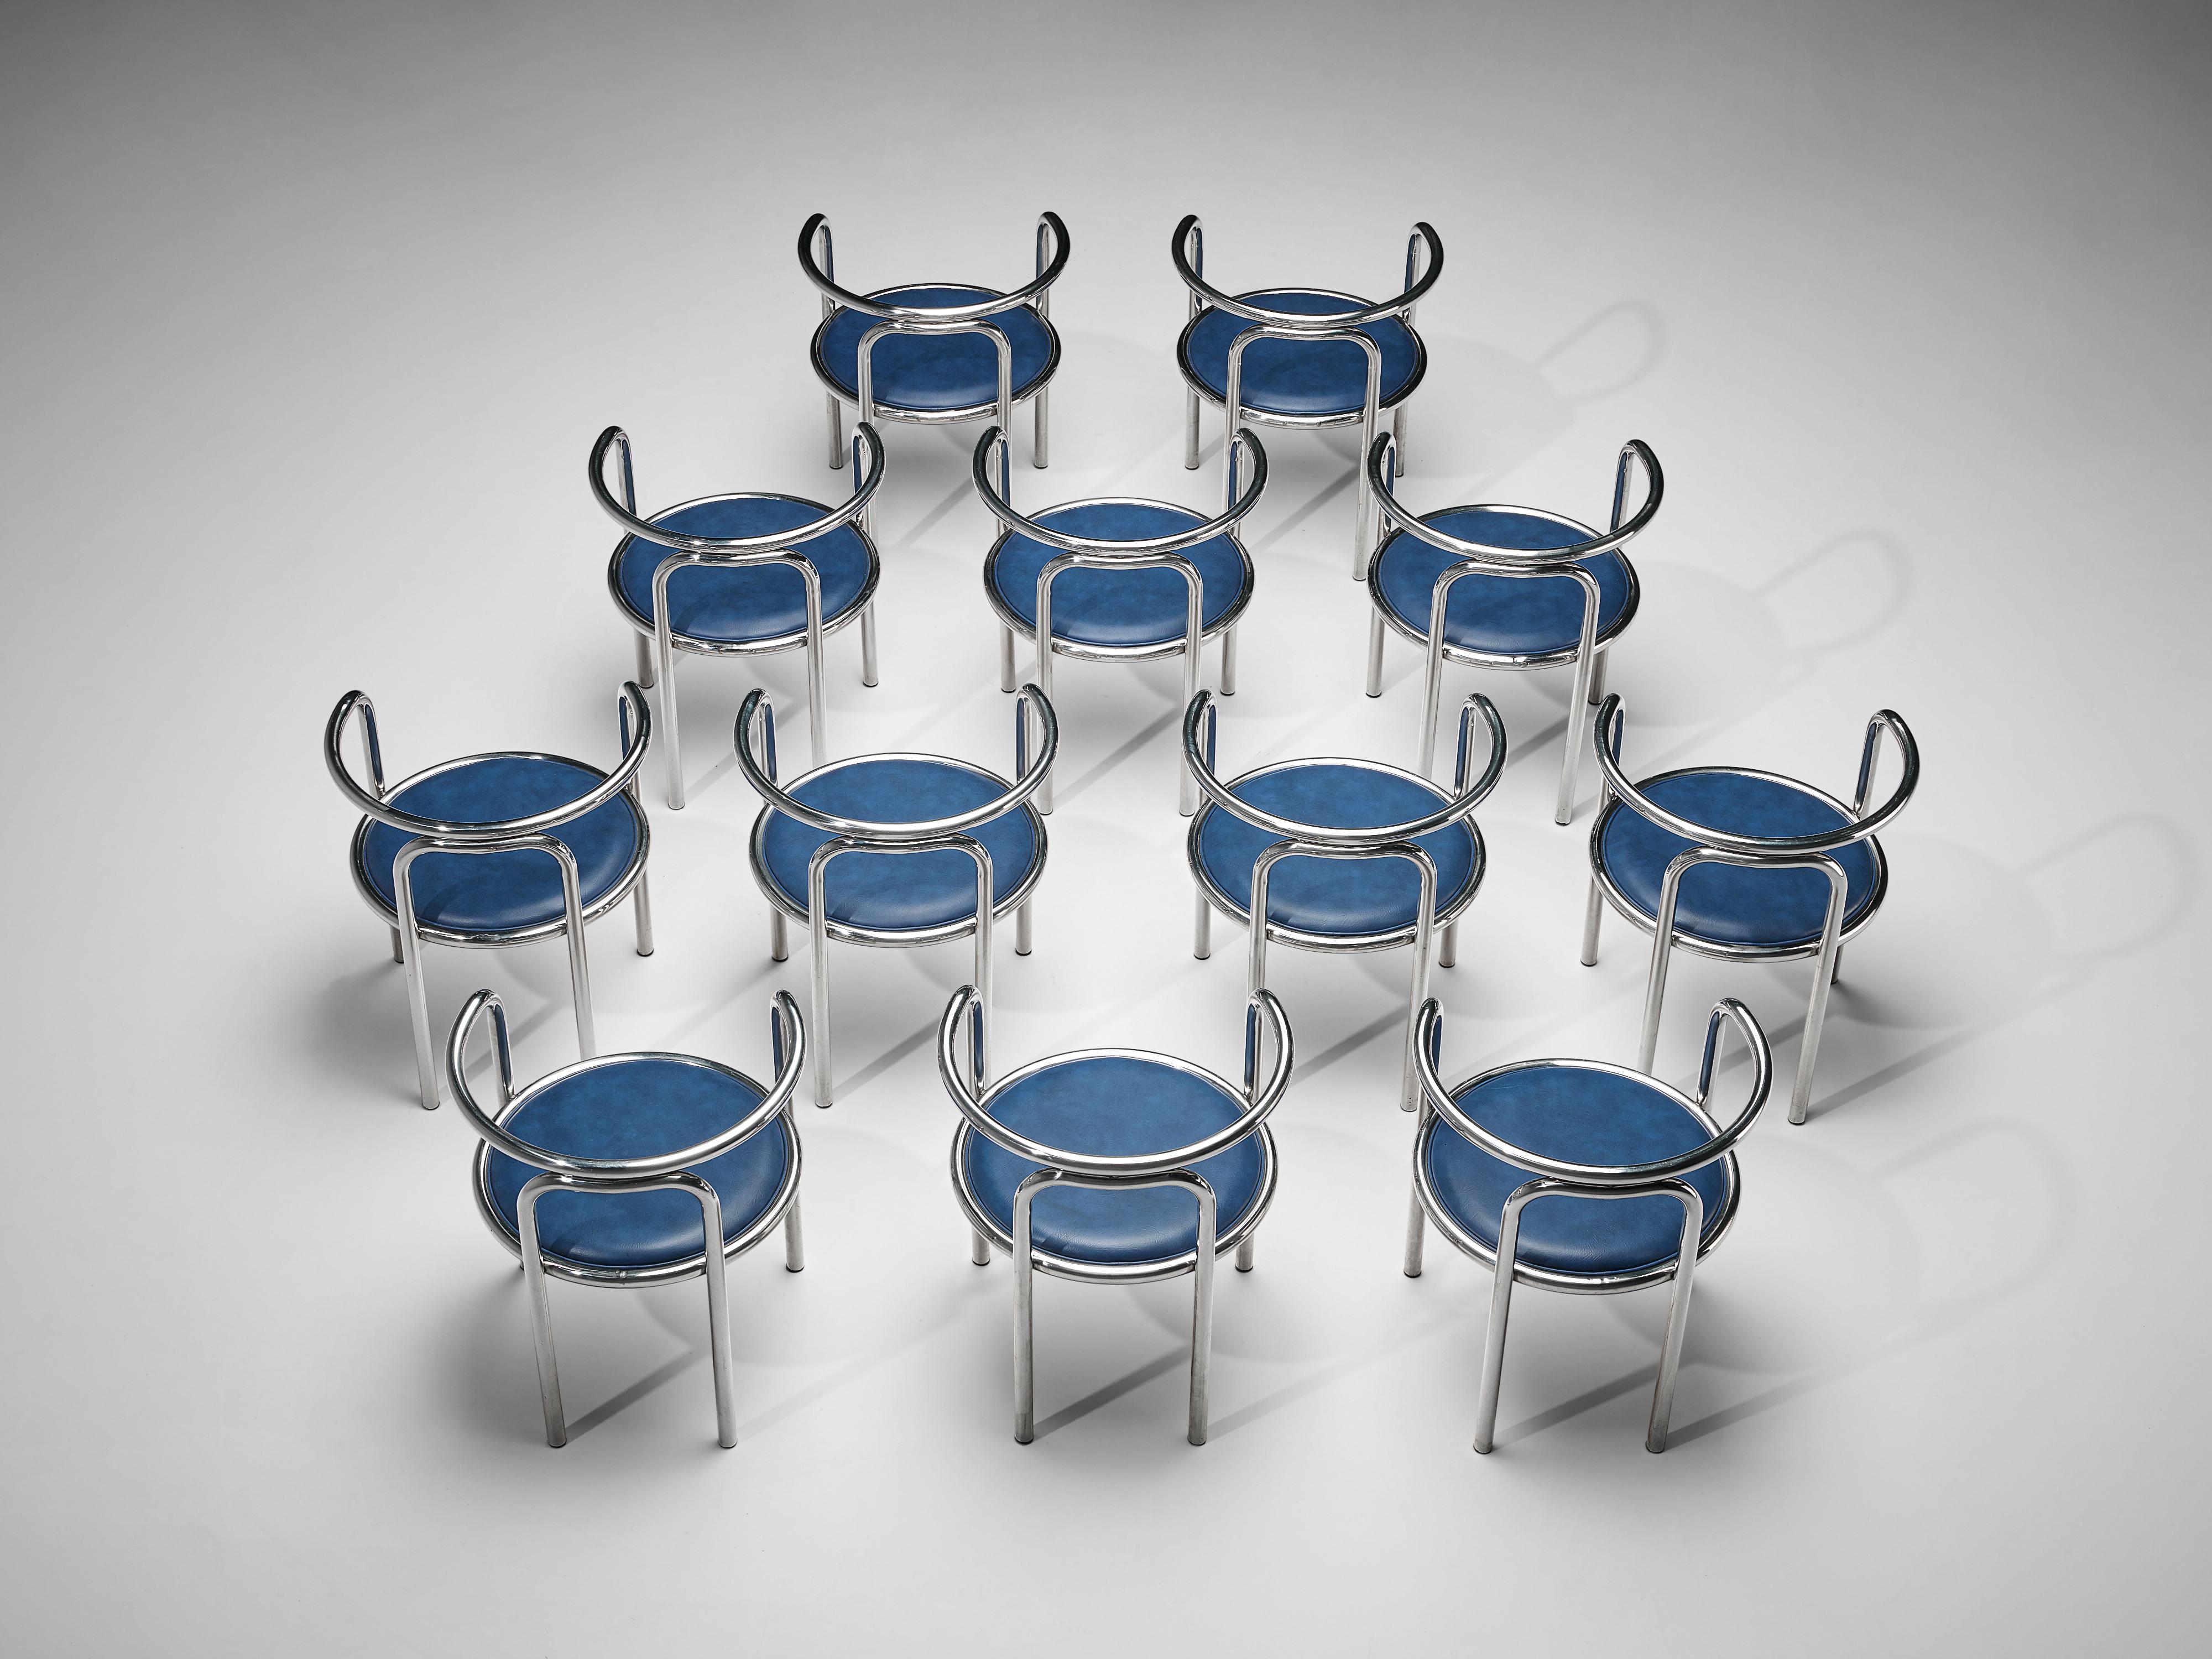 Gae Aulenti for Zanotta, set of twelve 'Locus Solus' armchairs, chromed tubular steel, blue leatherette, Italy, 1964

Set of twelve 'Locus Solus' armchairs. These armchairs, designed by Gae Aulenti and produced by Zanotta, are one of Aulenti’s